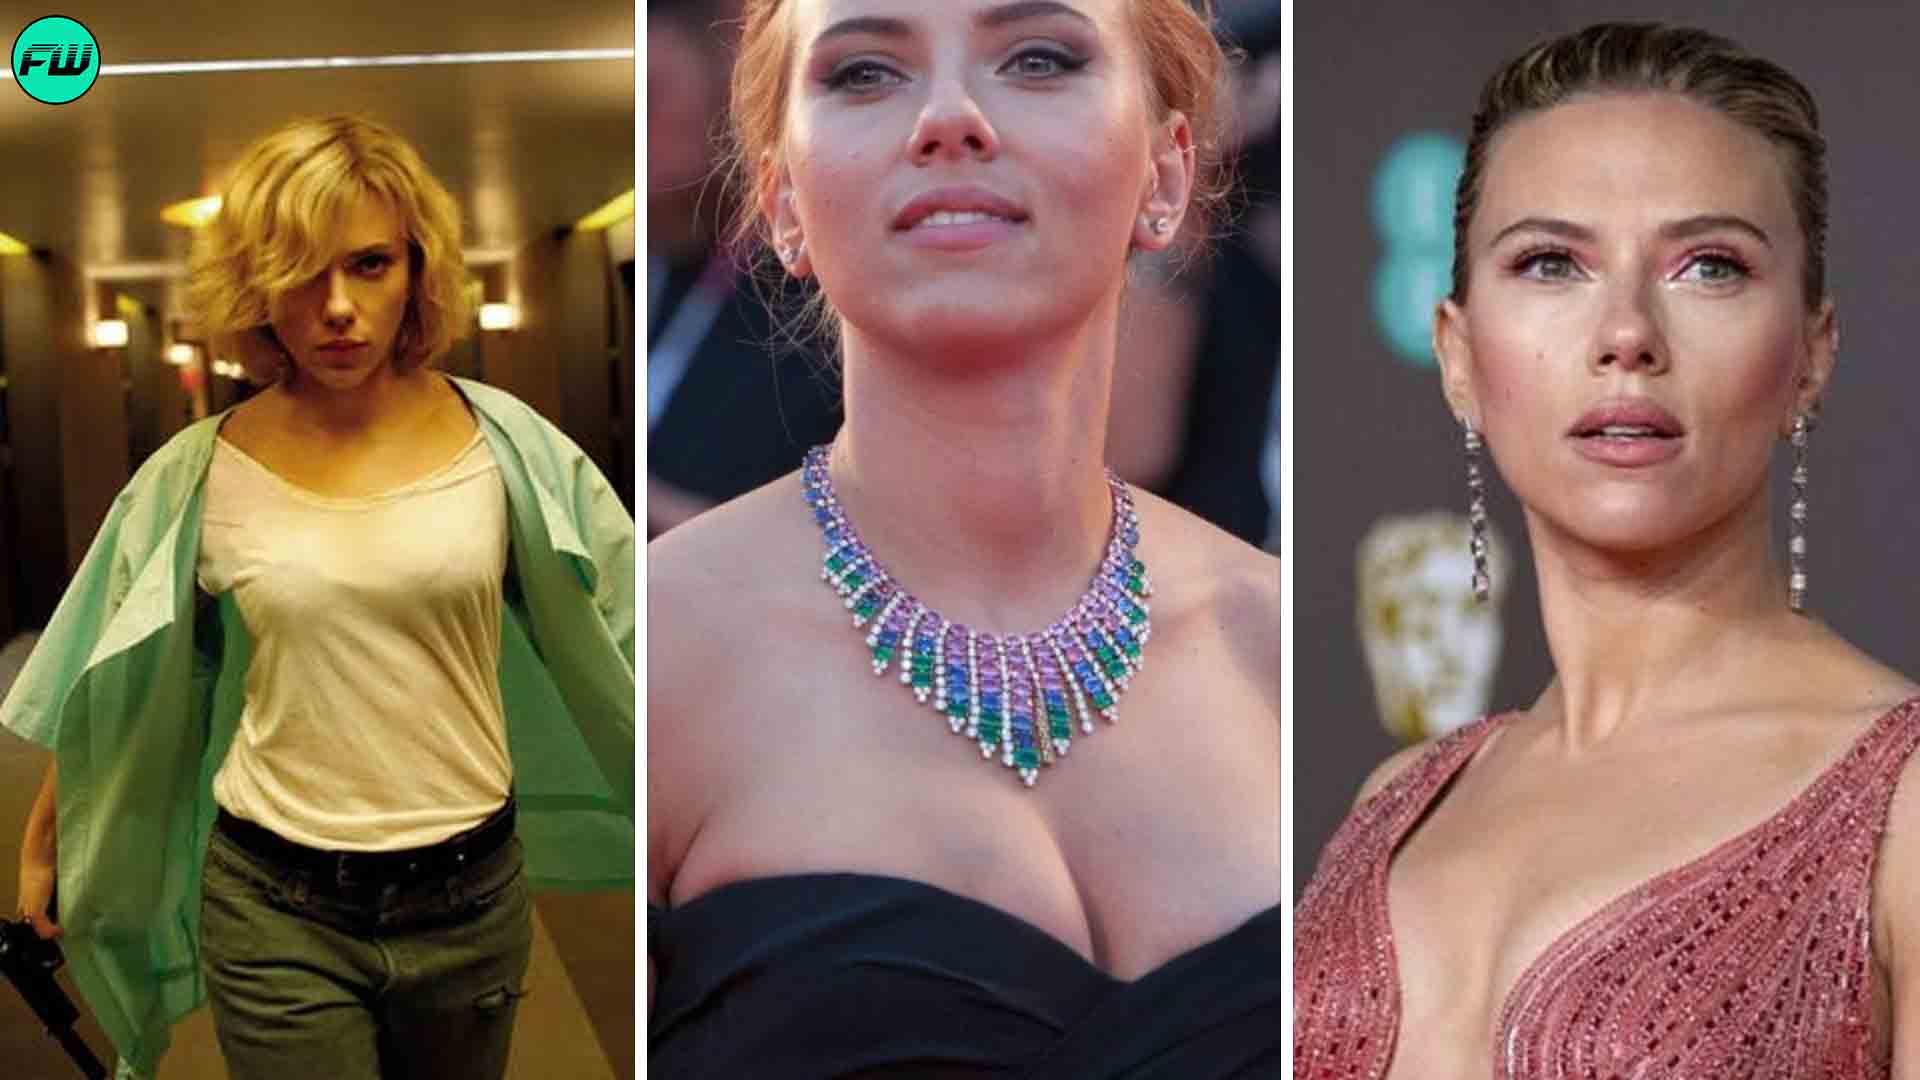 Scarlett Johansson Acting Role Controversy Explained